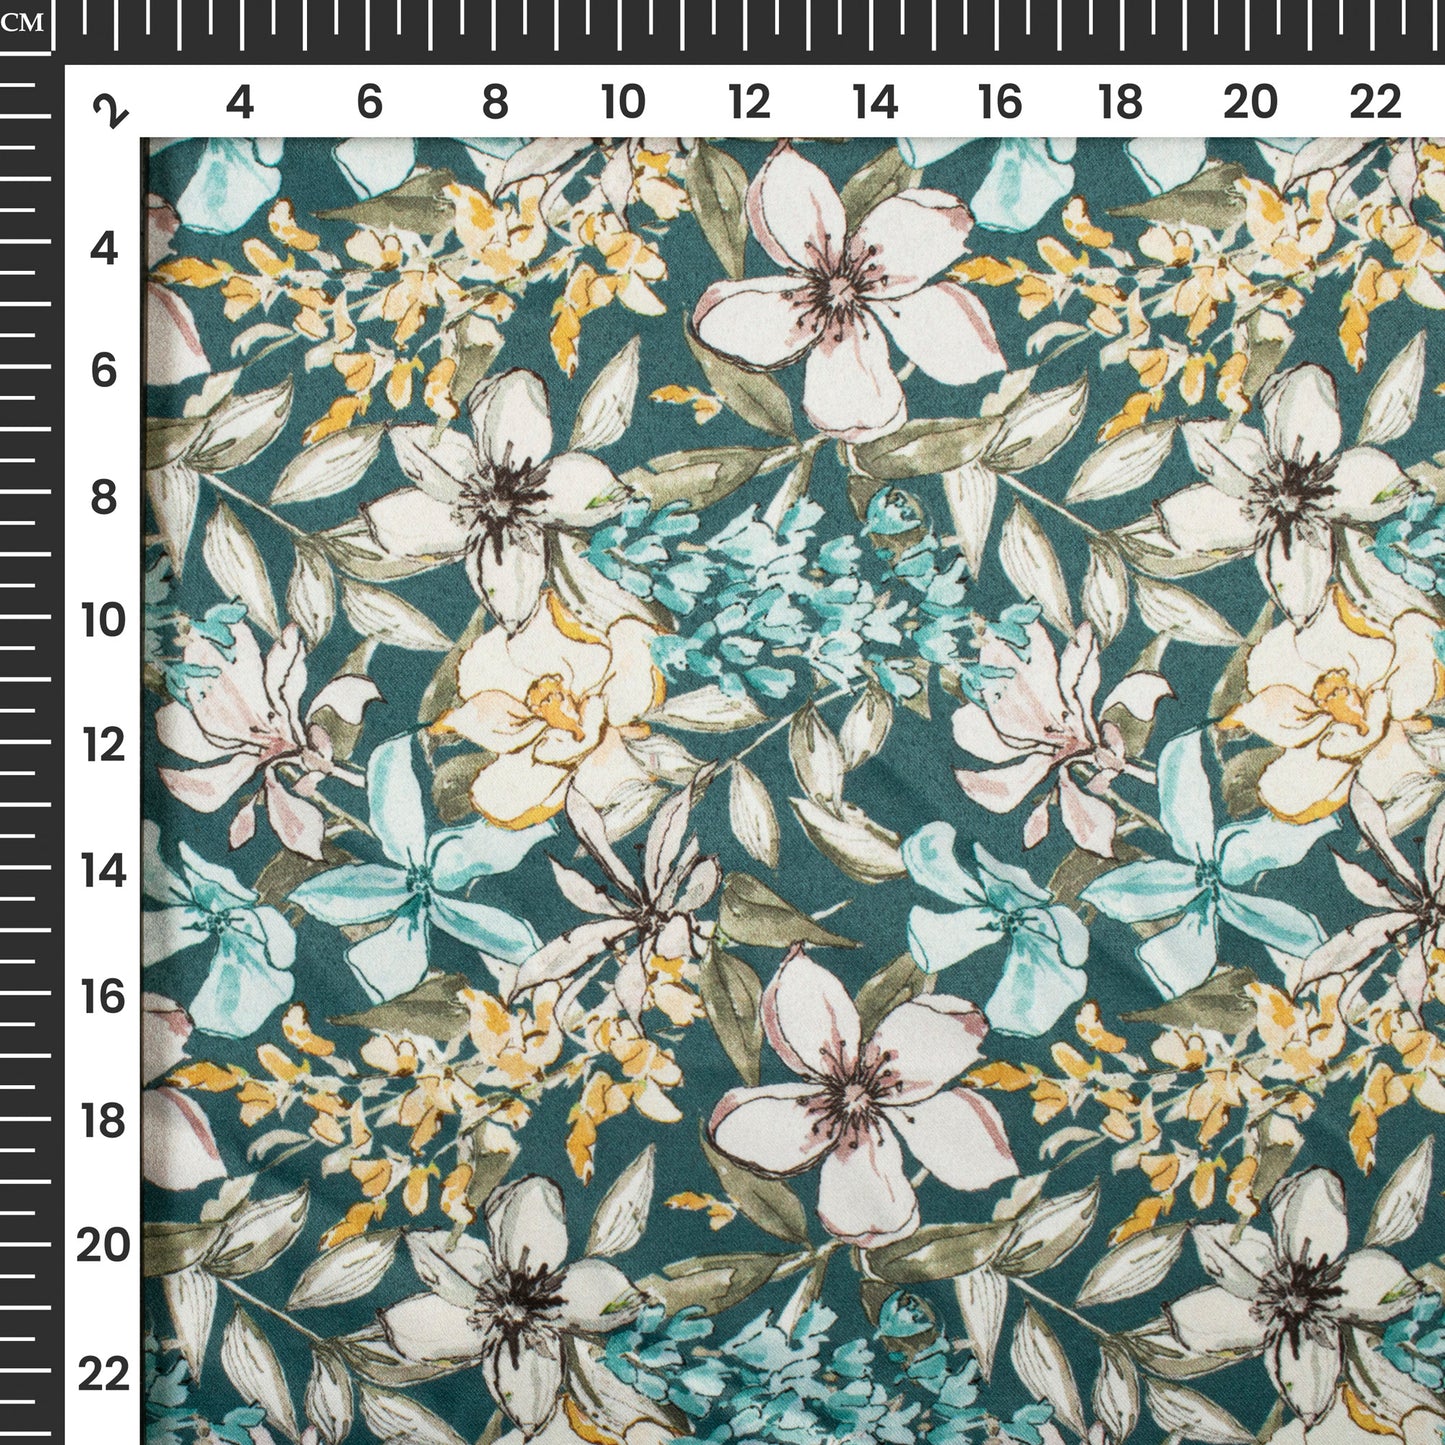 Teal Blue And Beige Floral Digital Print Charmeuse Satin Fabric (Width 58 Inches)